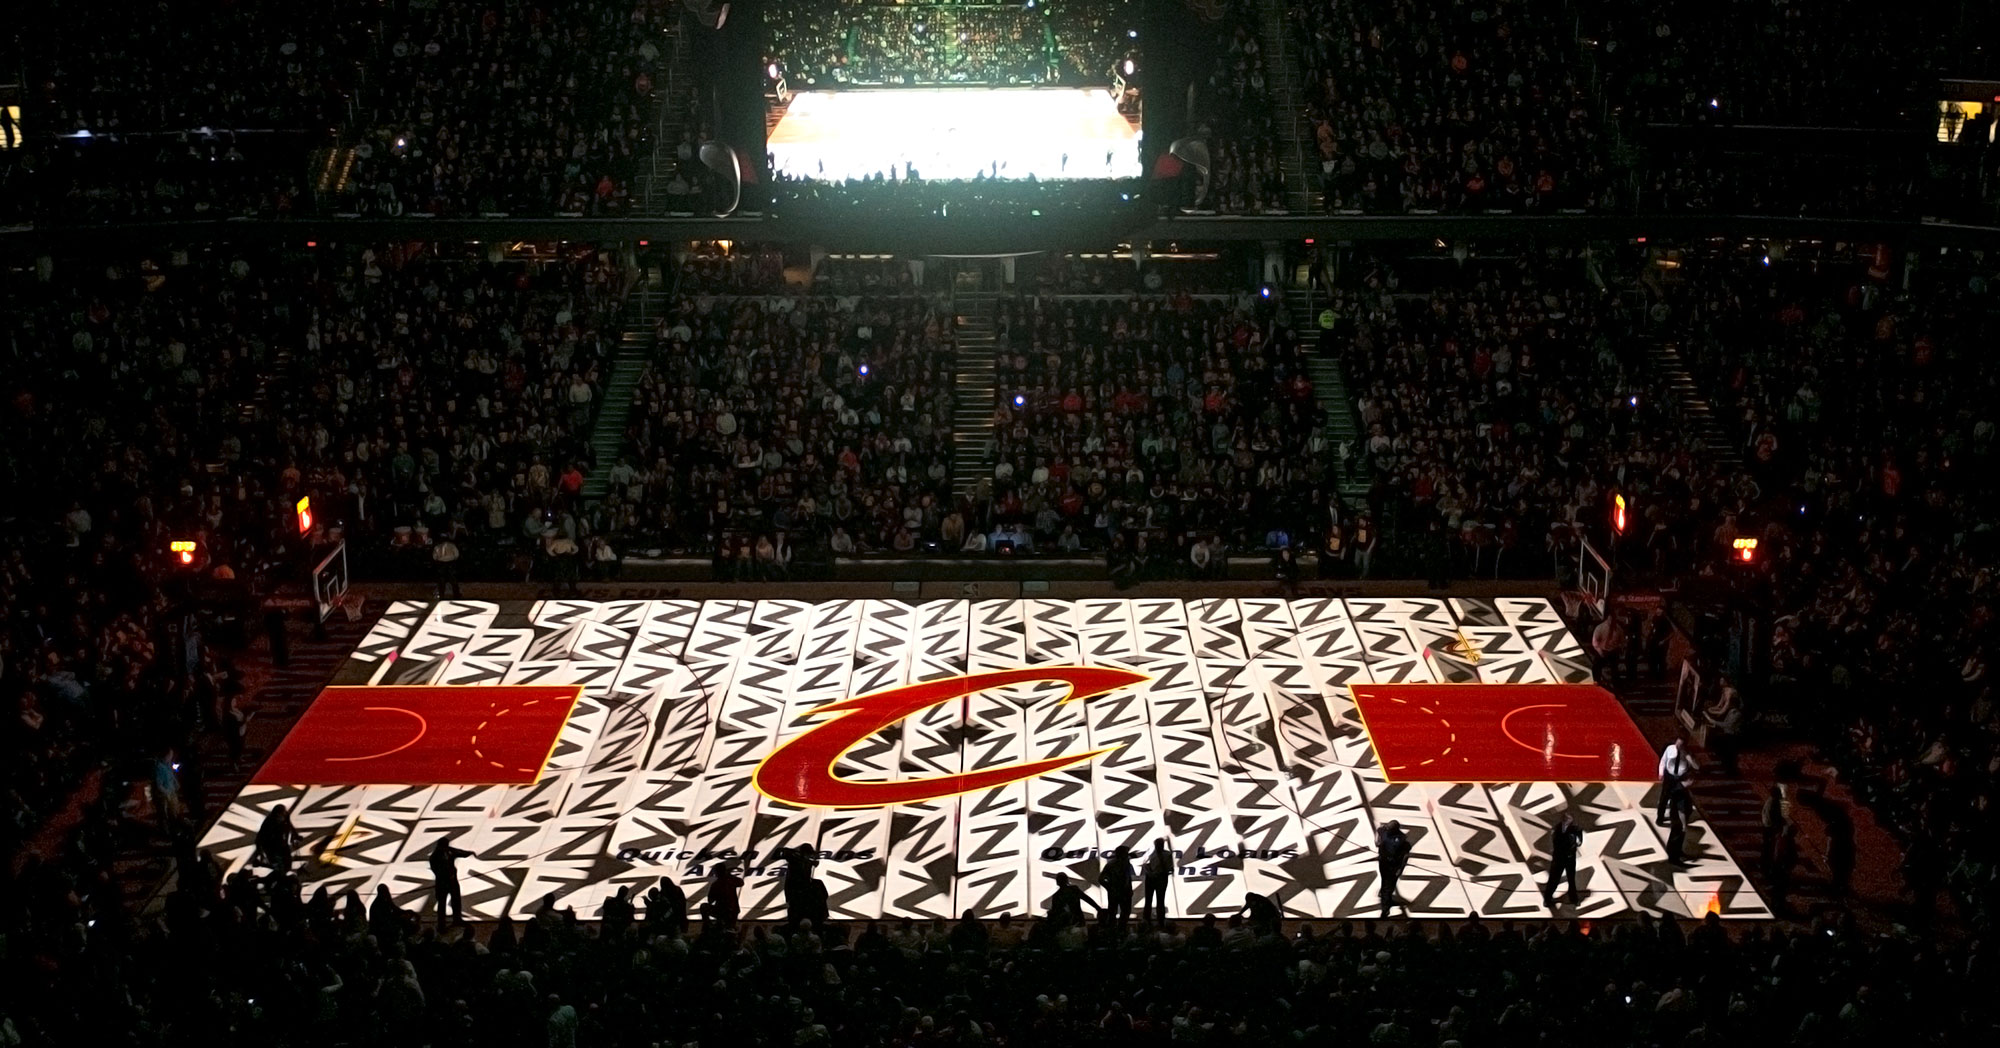 A pre-game display at a Cleveland Cavaliers game shows Quince Imaging's projection mapping opportunities.